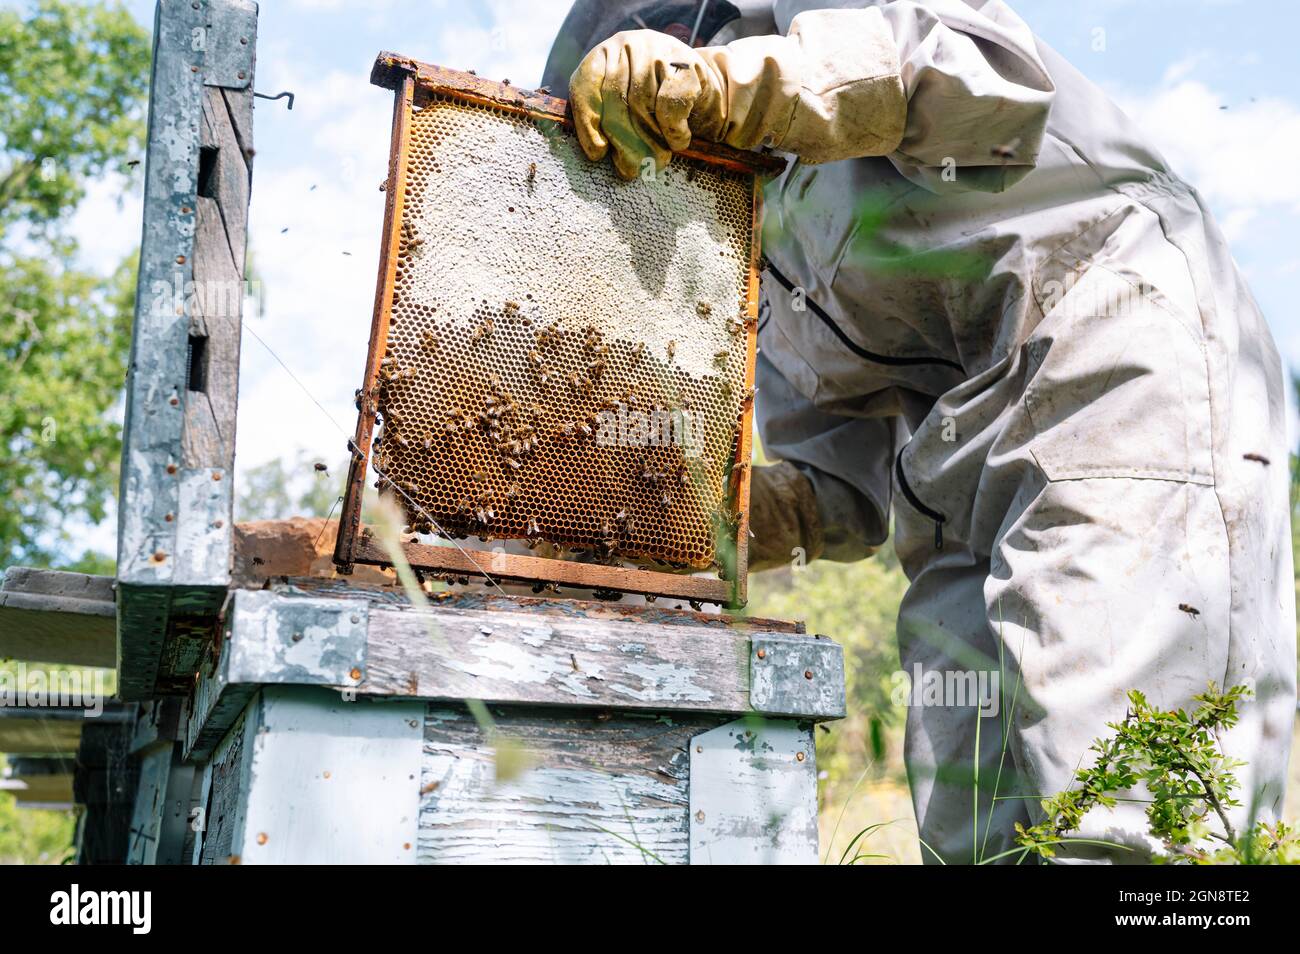 Female beekeeper using bee smoker on beehives in box at farm Stock Photo